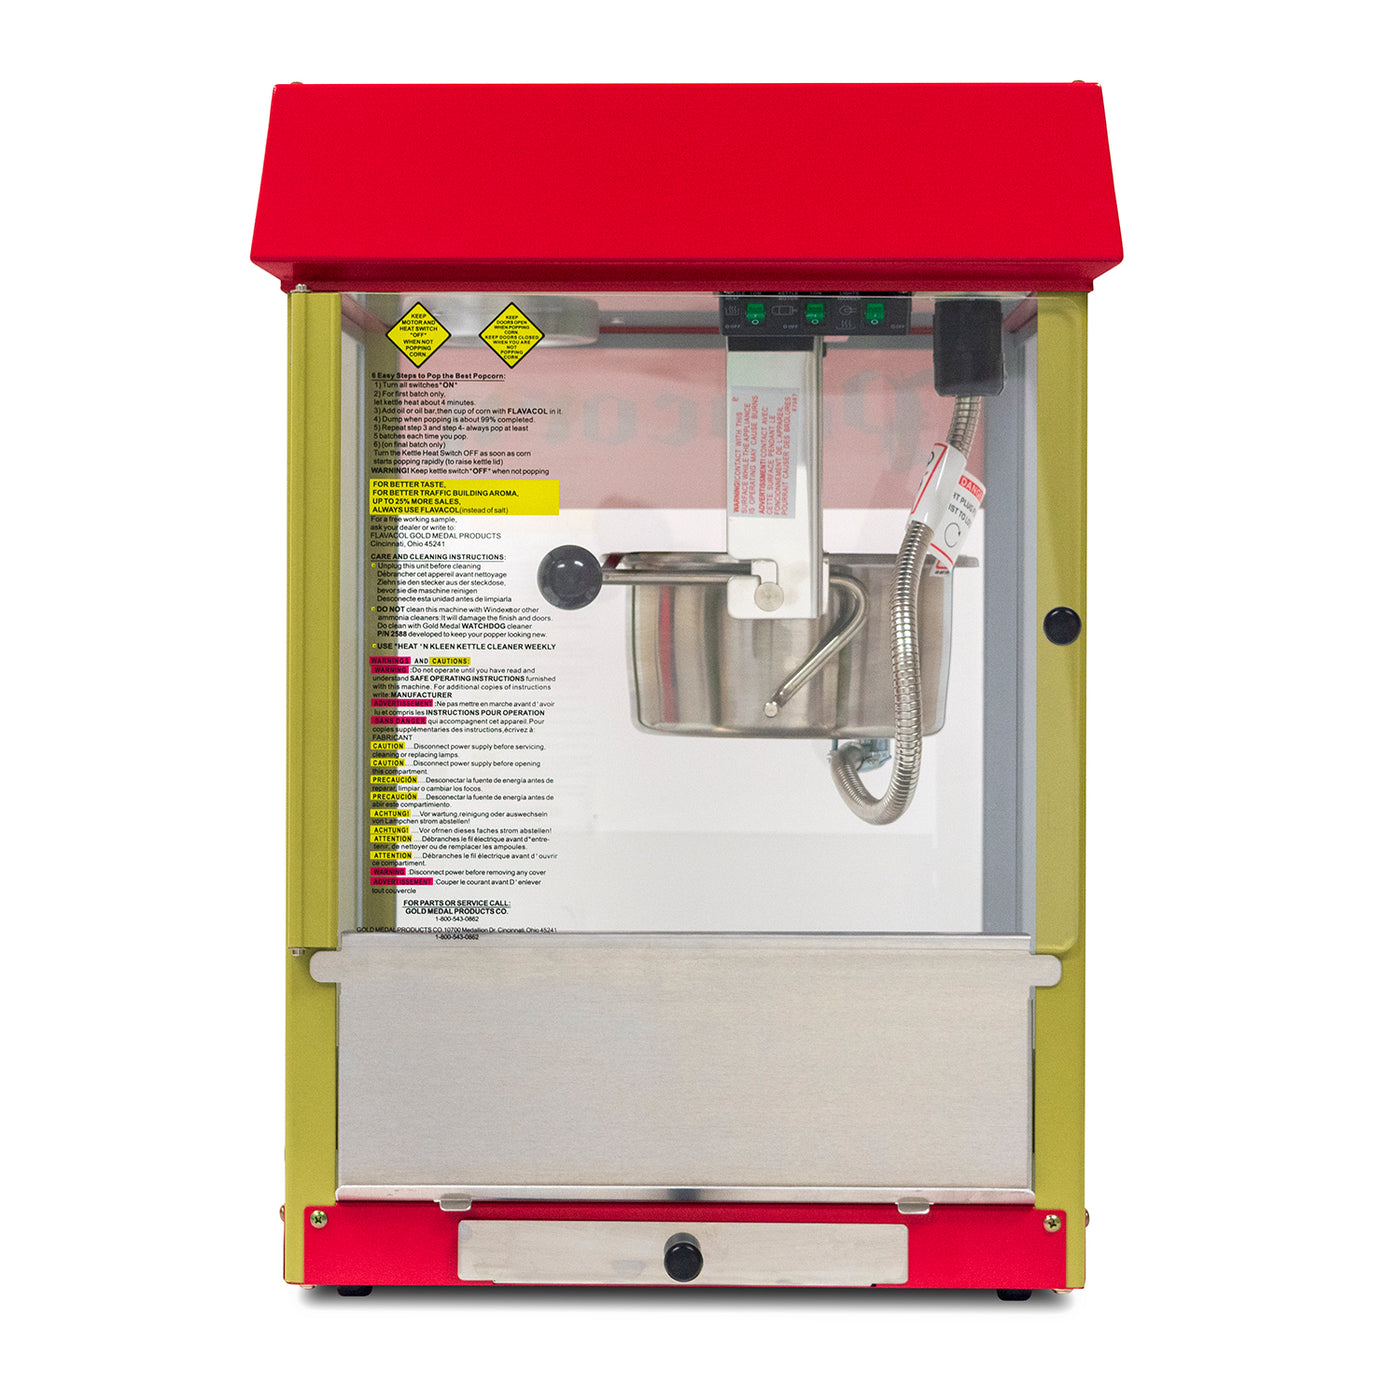 Rise by Dash RSP450GBRR04 Popcorn Machine, Red, 4.5 Quart